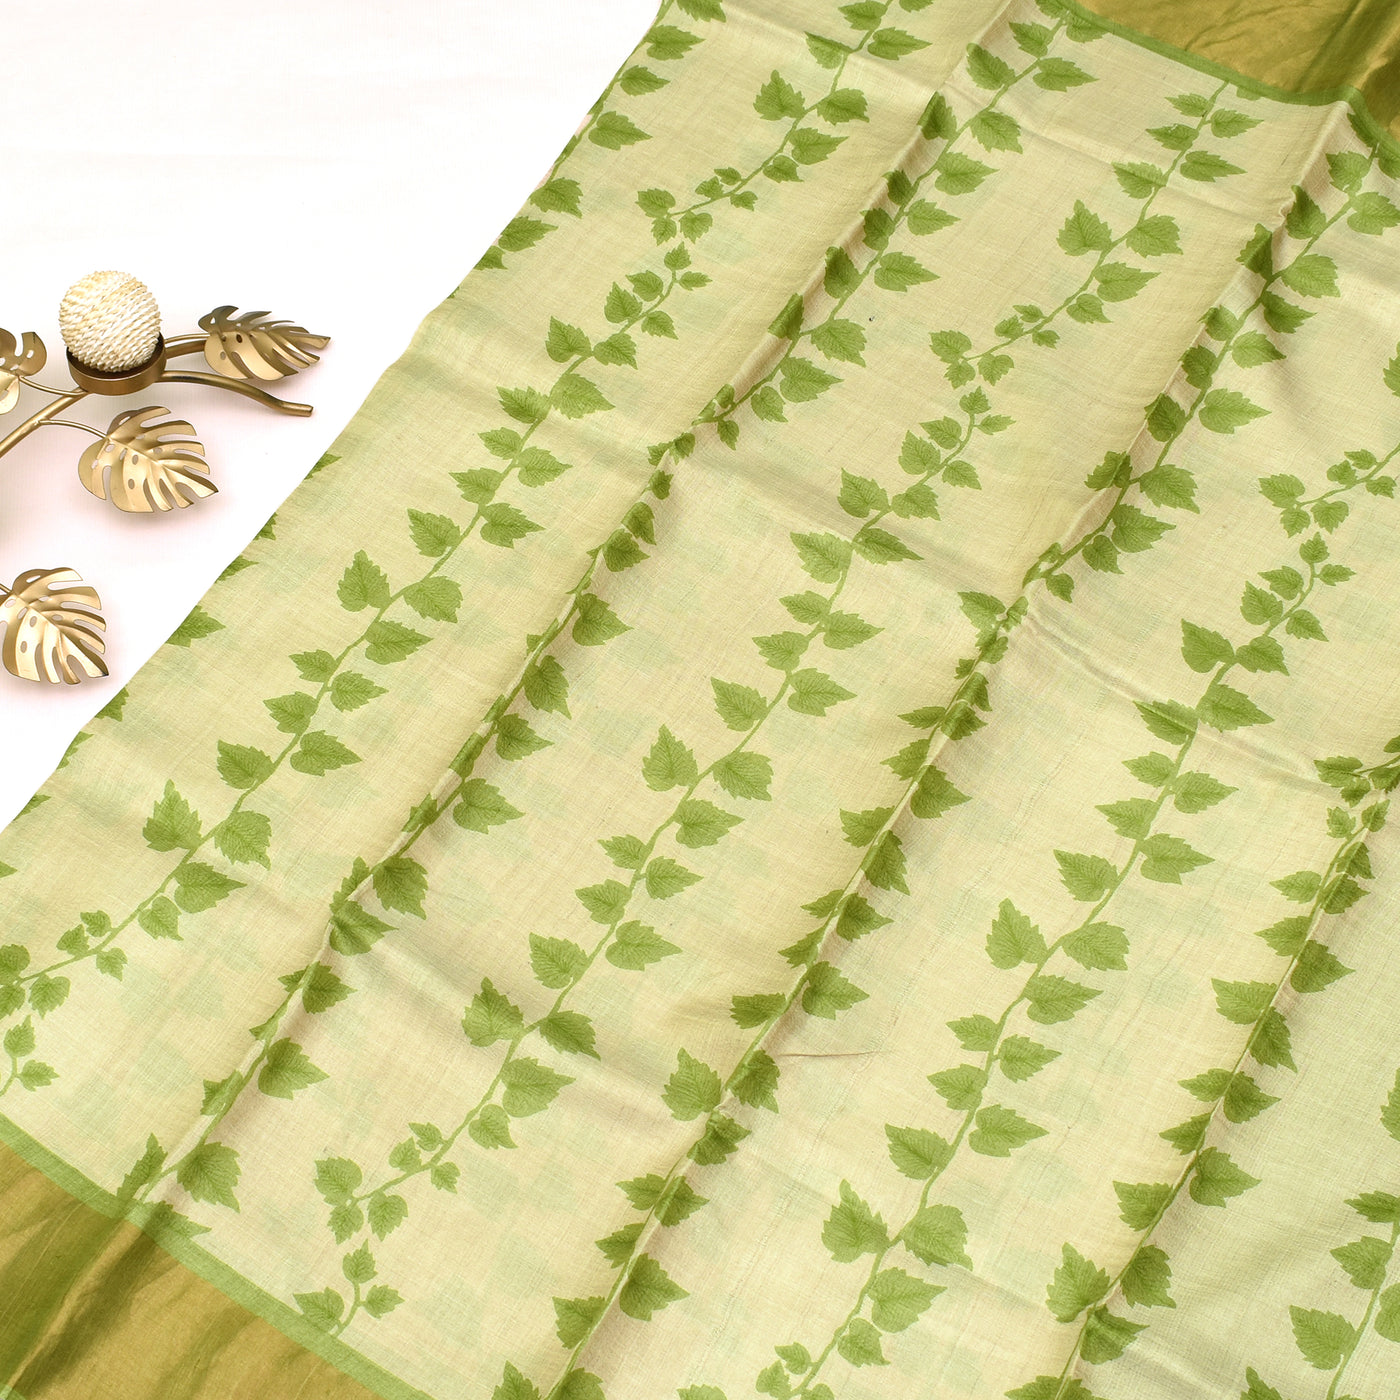 Off White Tussar Printed Saree with Green Leaf creeper design